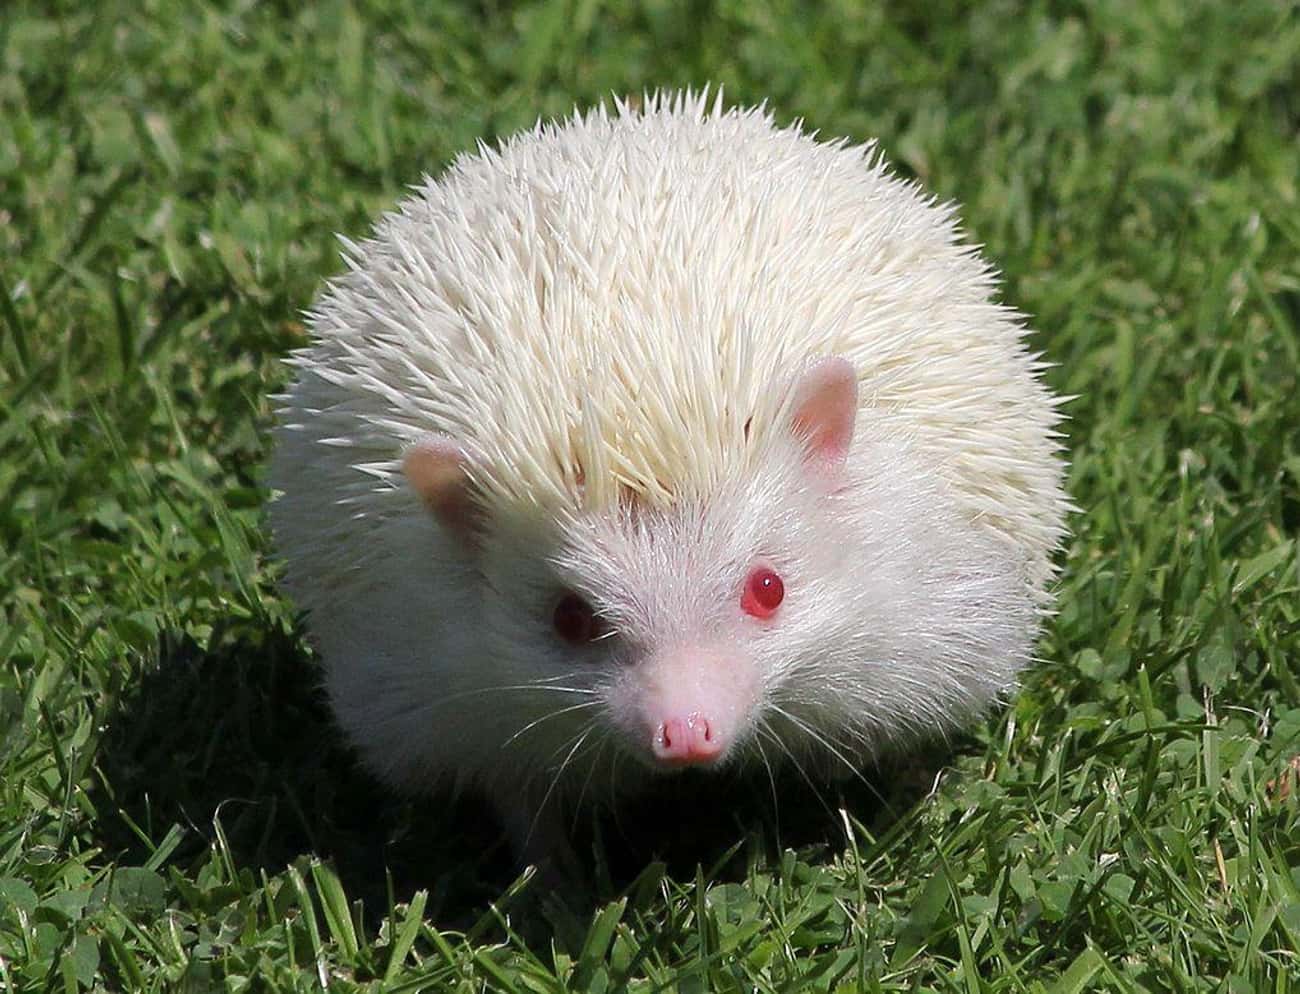 This Little Hedgehog Has A Piercing Stare